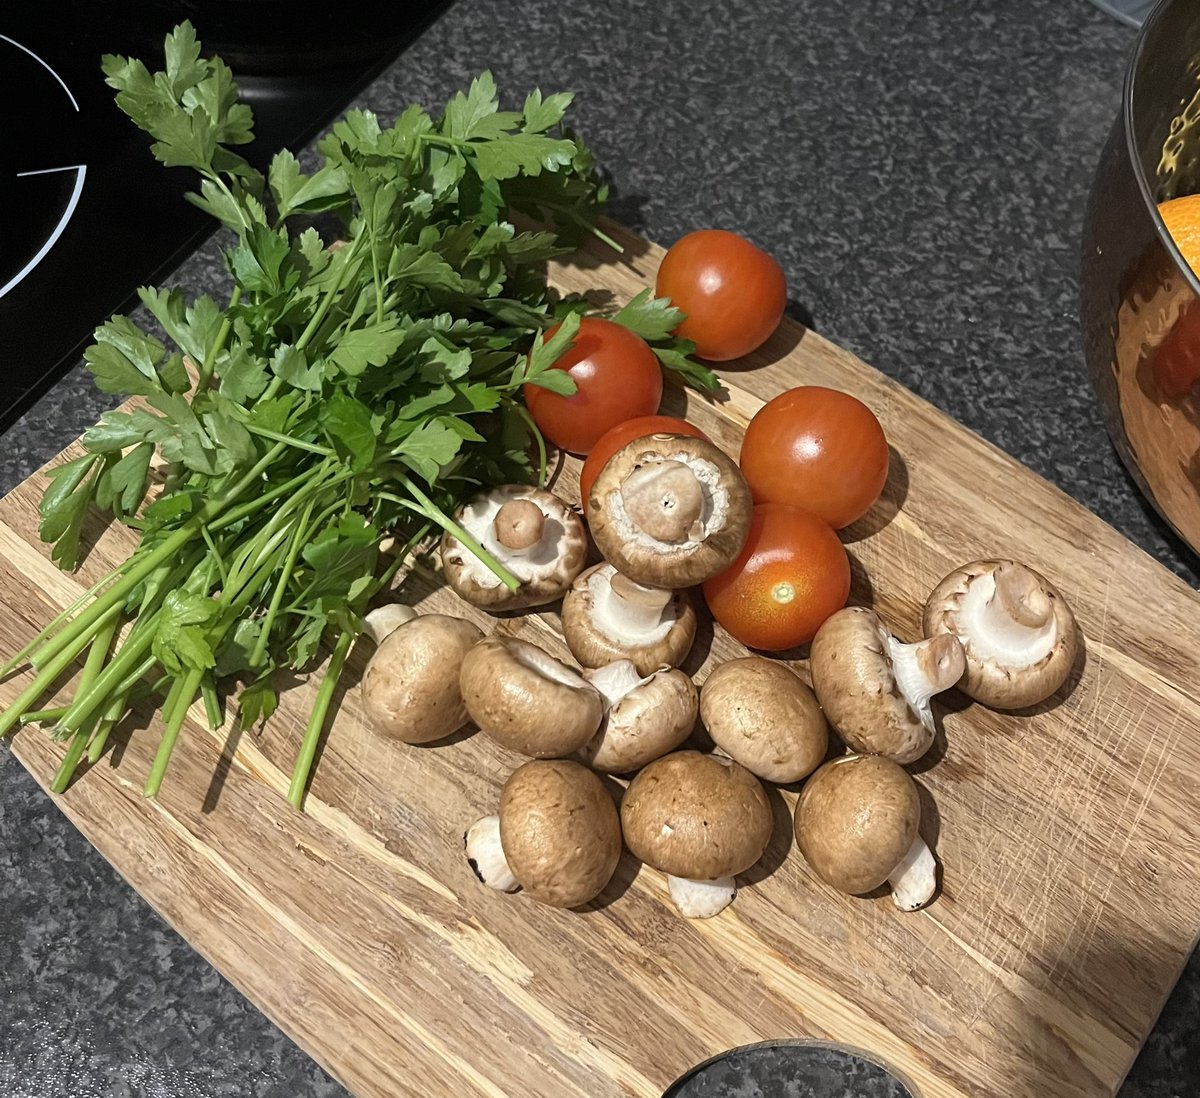 Whenever I prepare mushrooms for tea I think about my gran in her kitchen and it warms my heart. The meaning of occupation has so many layers. Right down to the single ingredients of a meal. #MeaningfulOccupations #OccupationalScience #Cooking #Family